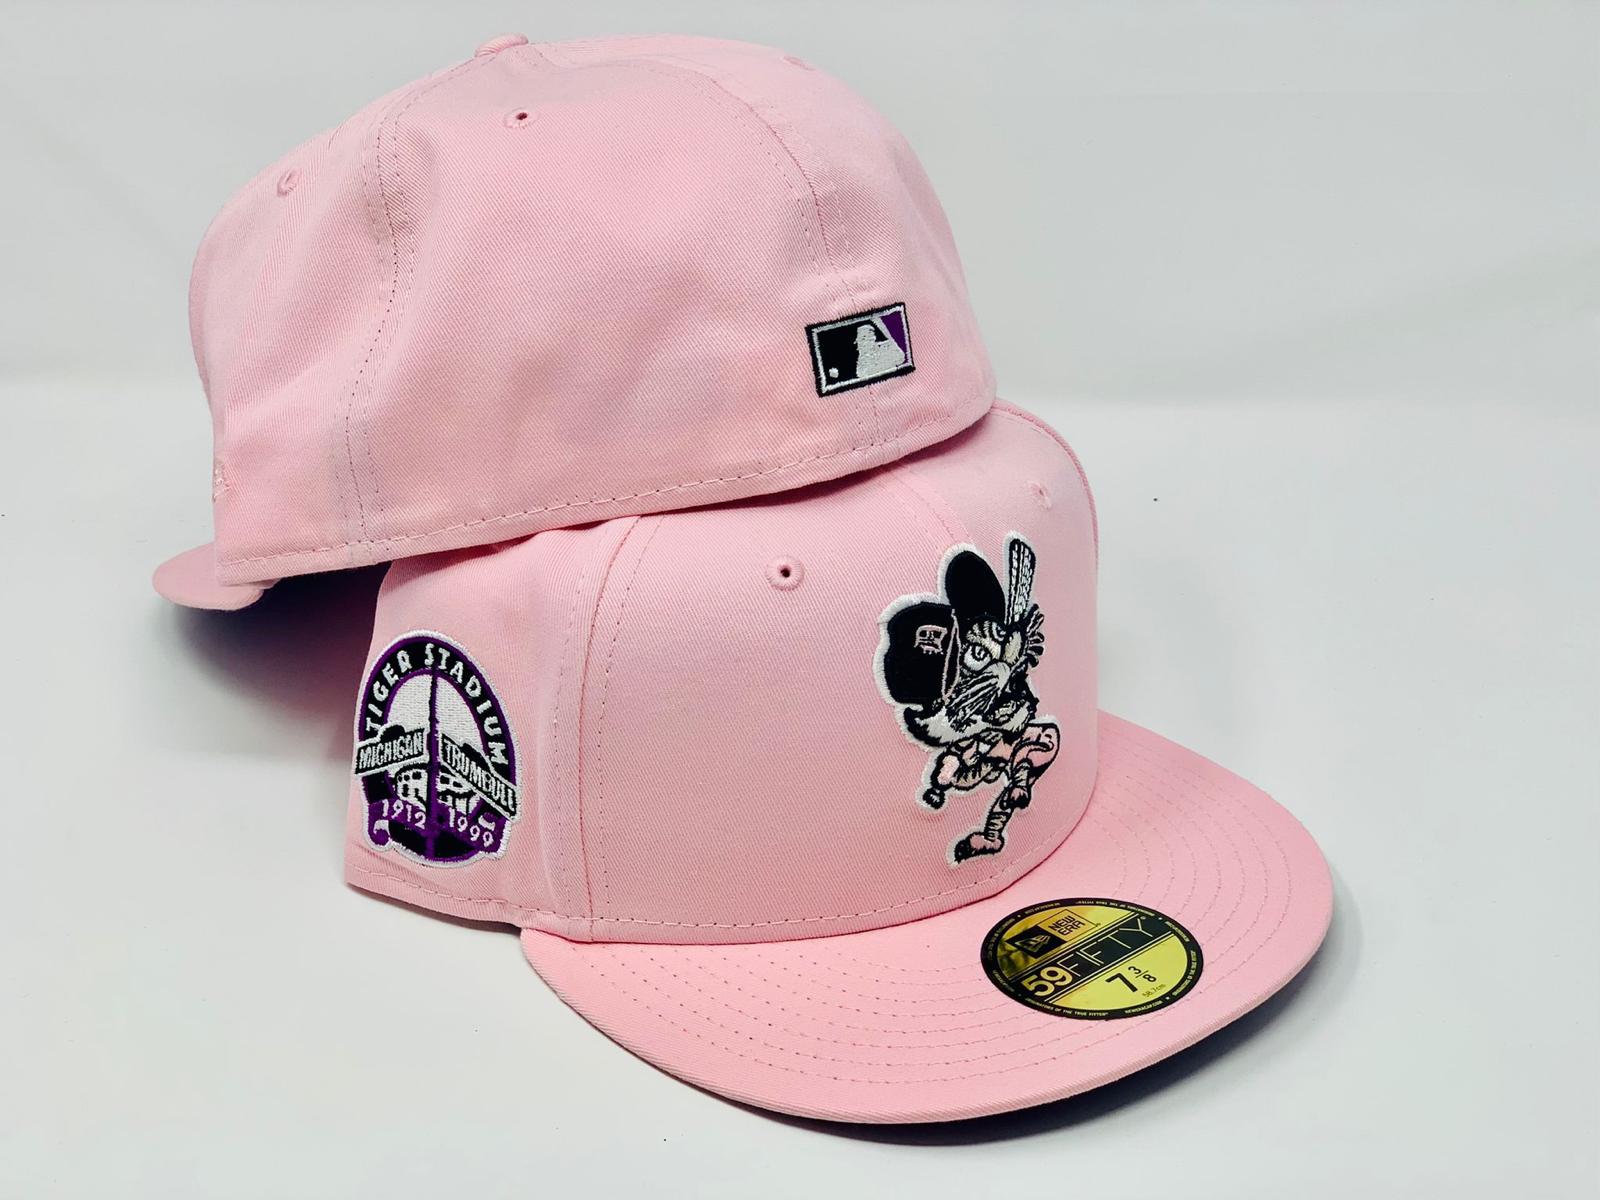 New Detroit Tigers New Era Hat Brown Pink Uv for Sale in Ontario, CA -  OfferUp